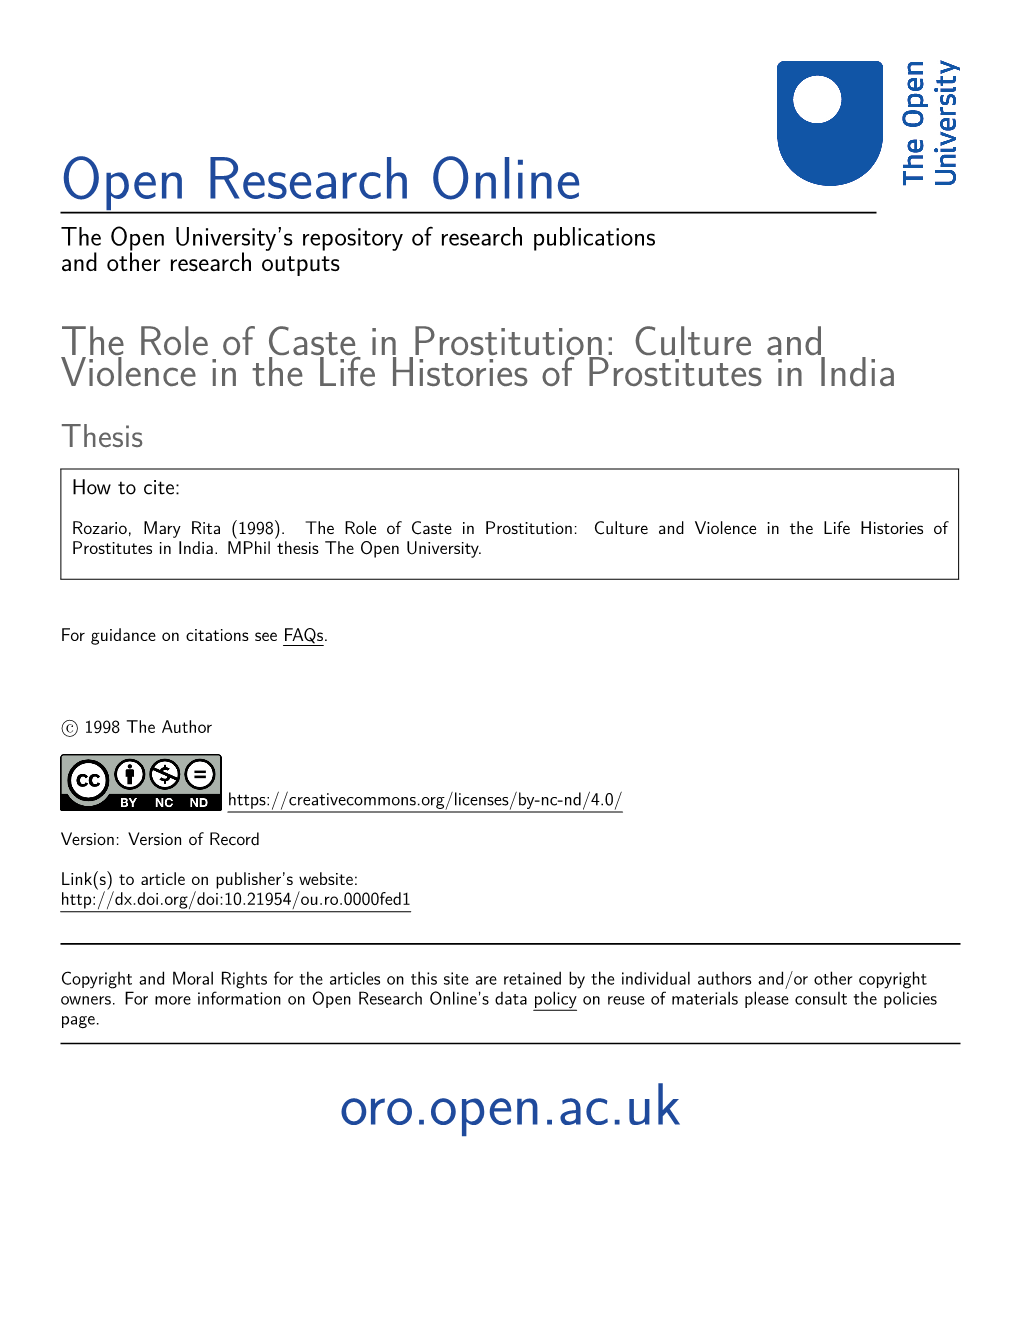 The Role of Caste in Prostitution: Culture and Violence in the Life Histories of Prostitutes in India Thesis